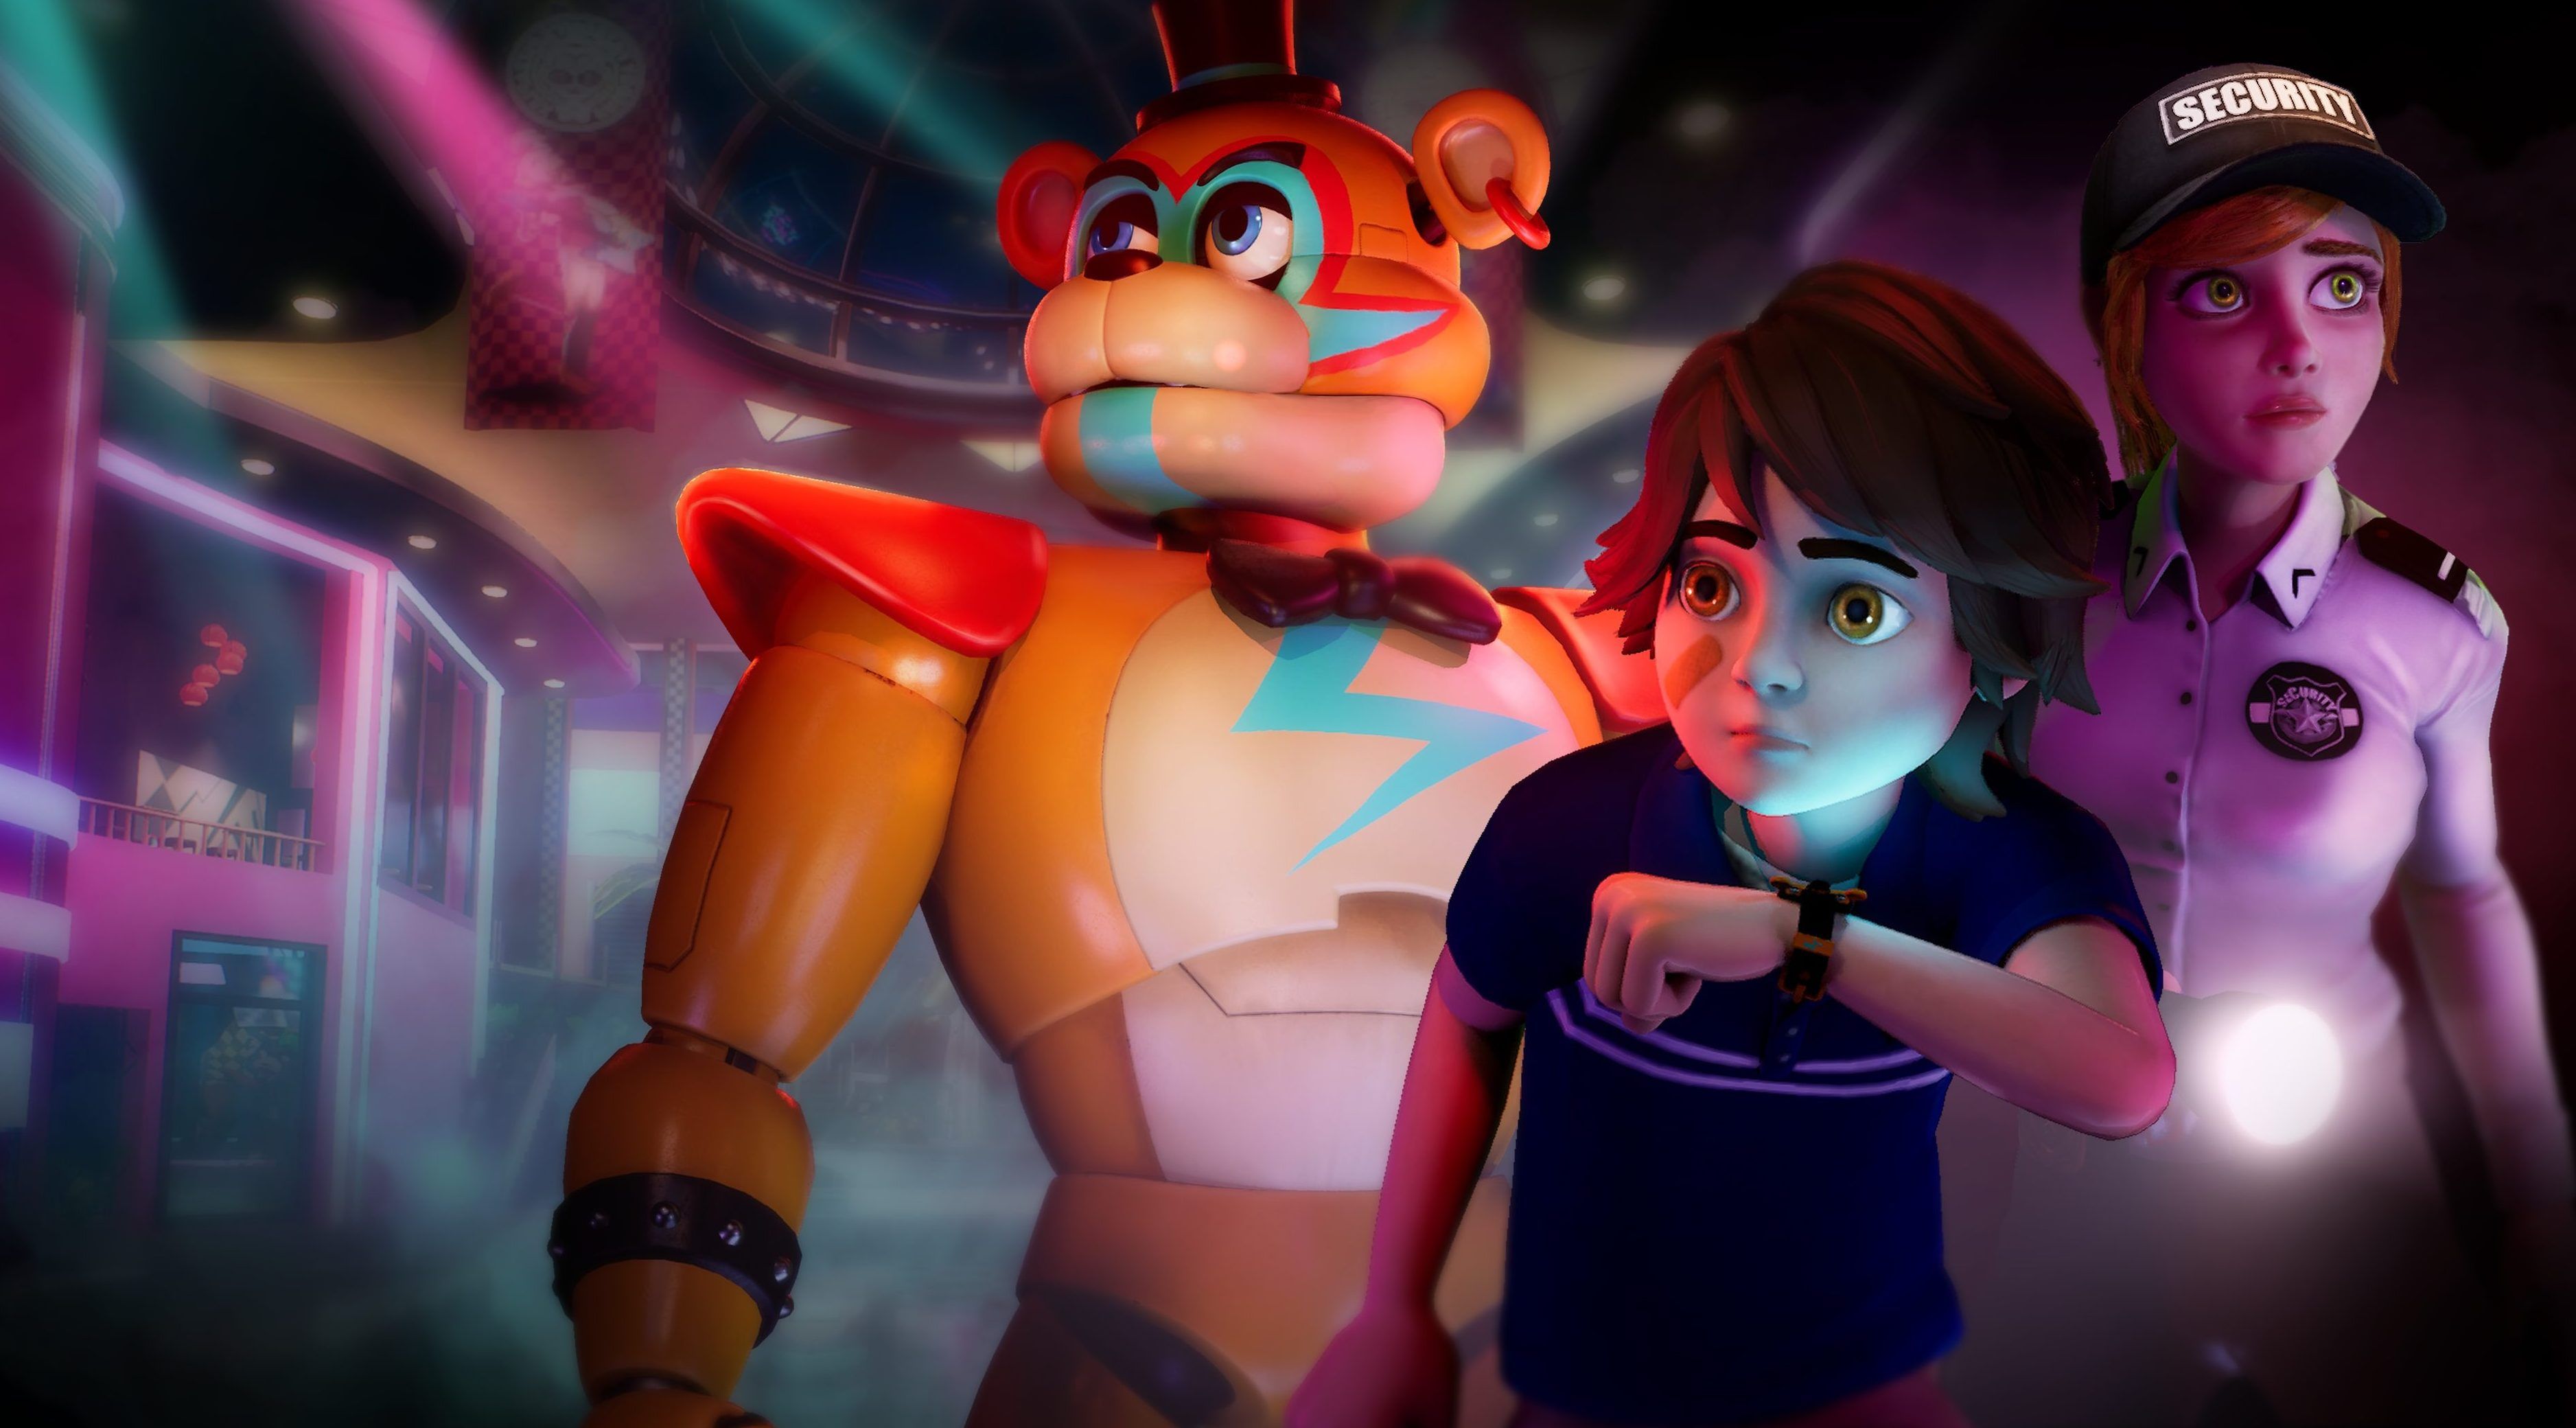 Five Nights at Freddy's: Security Breach Gets First Update After